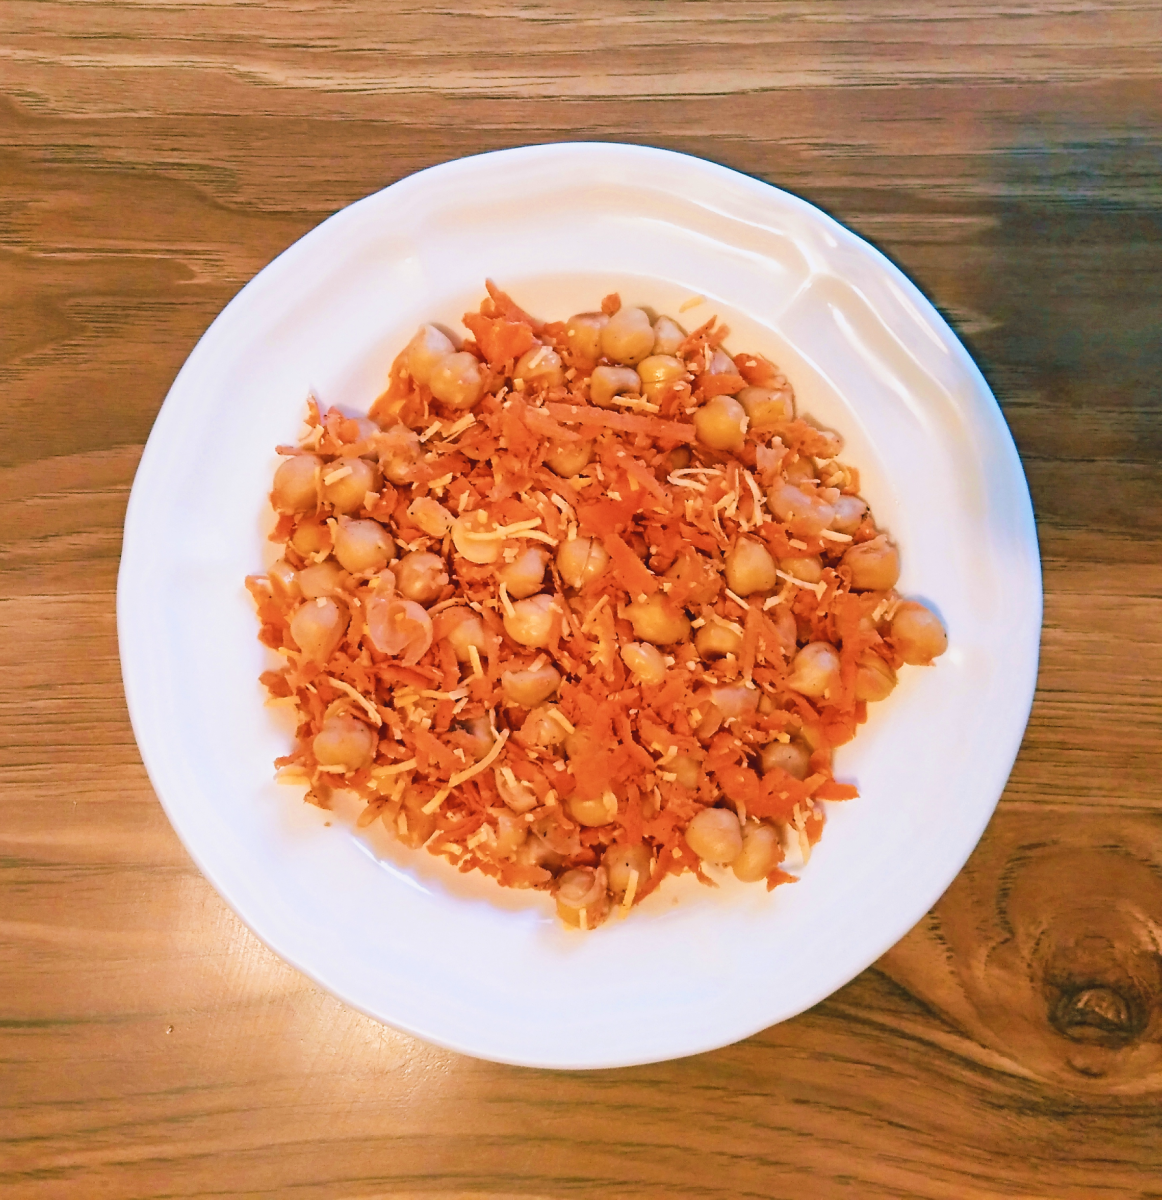 Triple 'C' Salad With Carrots, Coconut, and Chickpeas